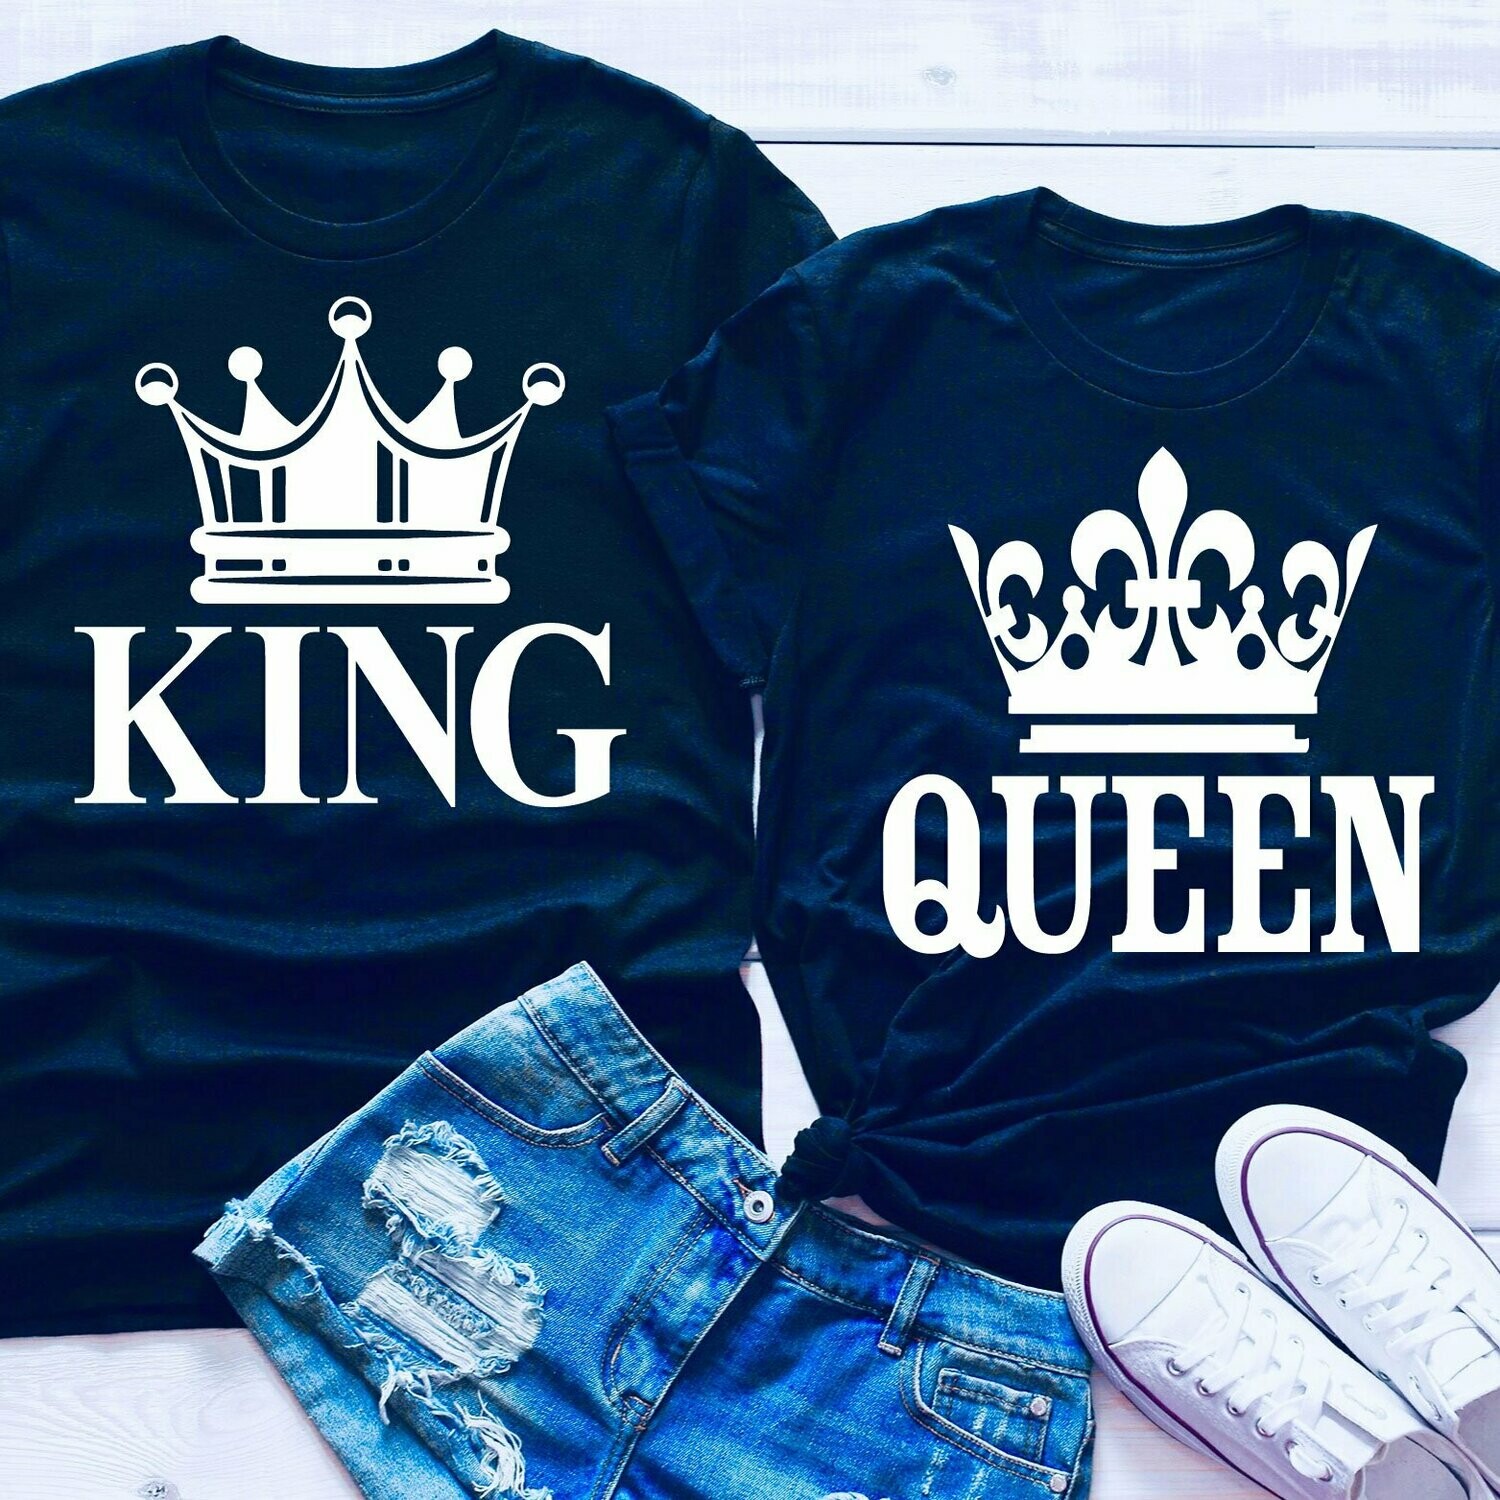 King and Queen Crown Prints Type 1